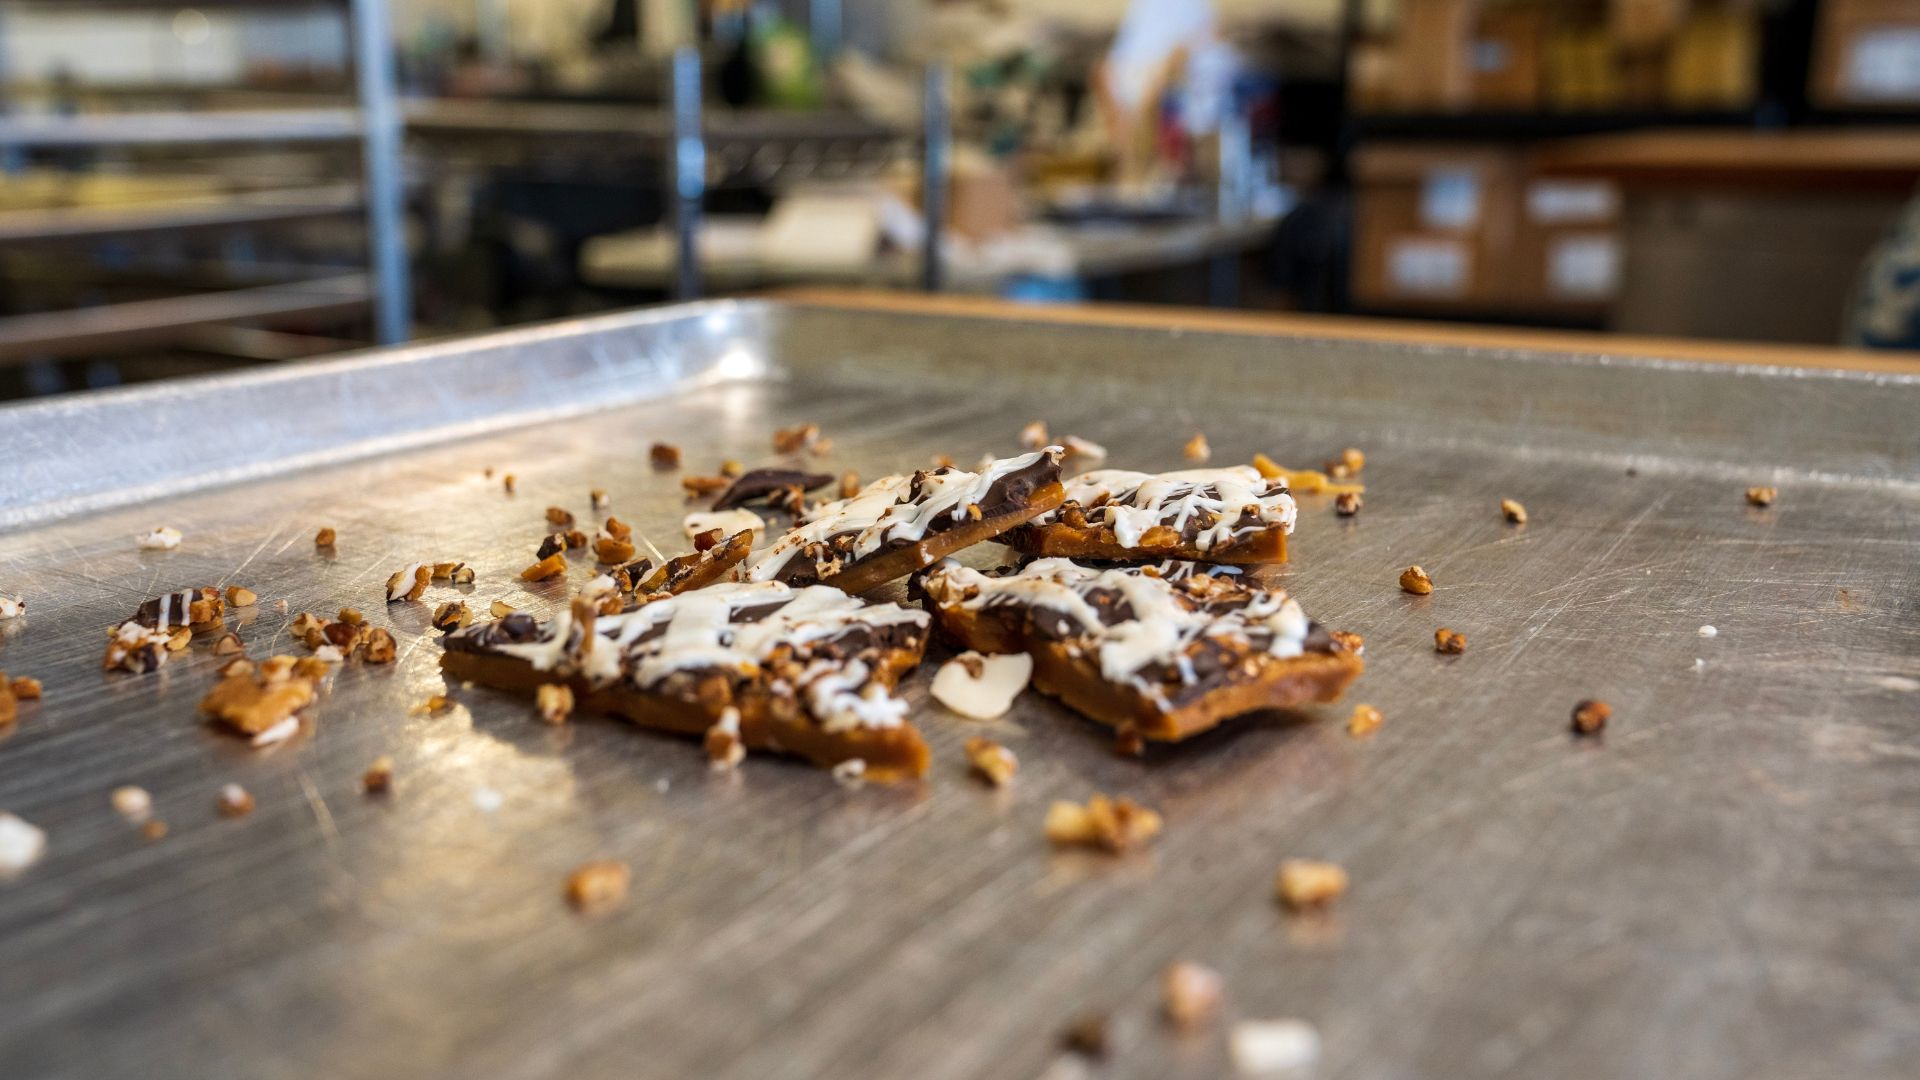 The Caramel House in St. Louis makes addictive English toffee.